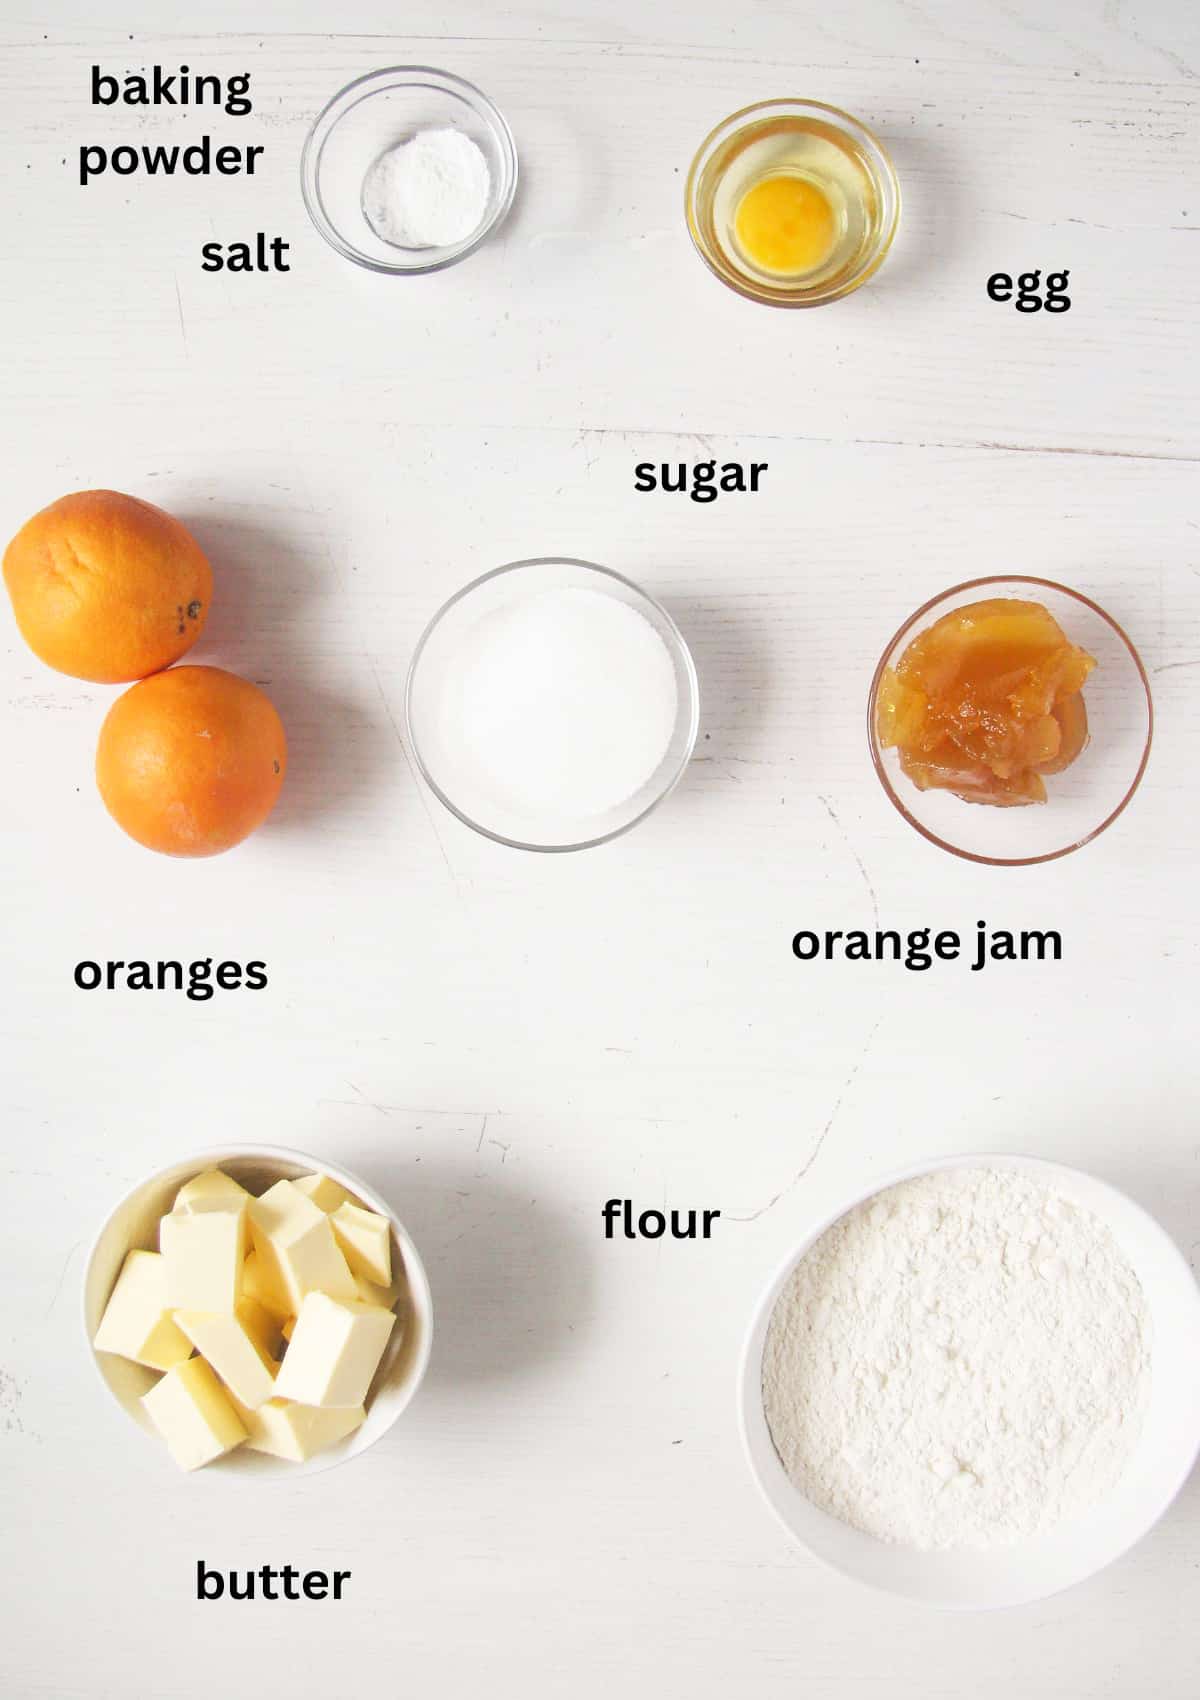 listed ingredients for making cookies with orange jam on the table.